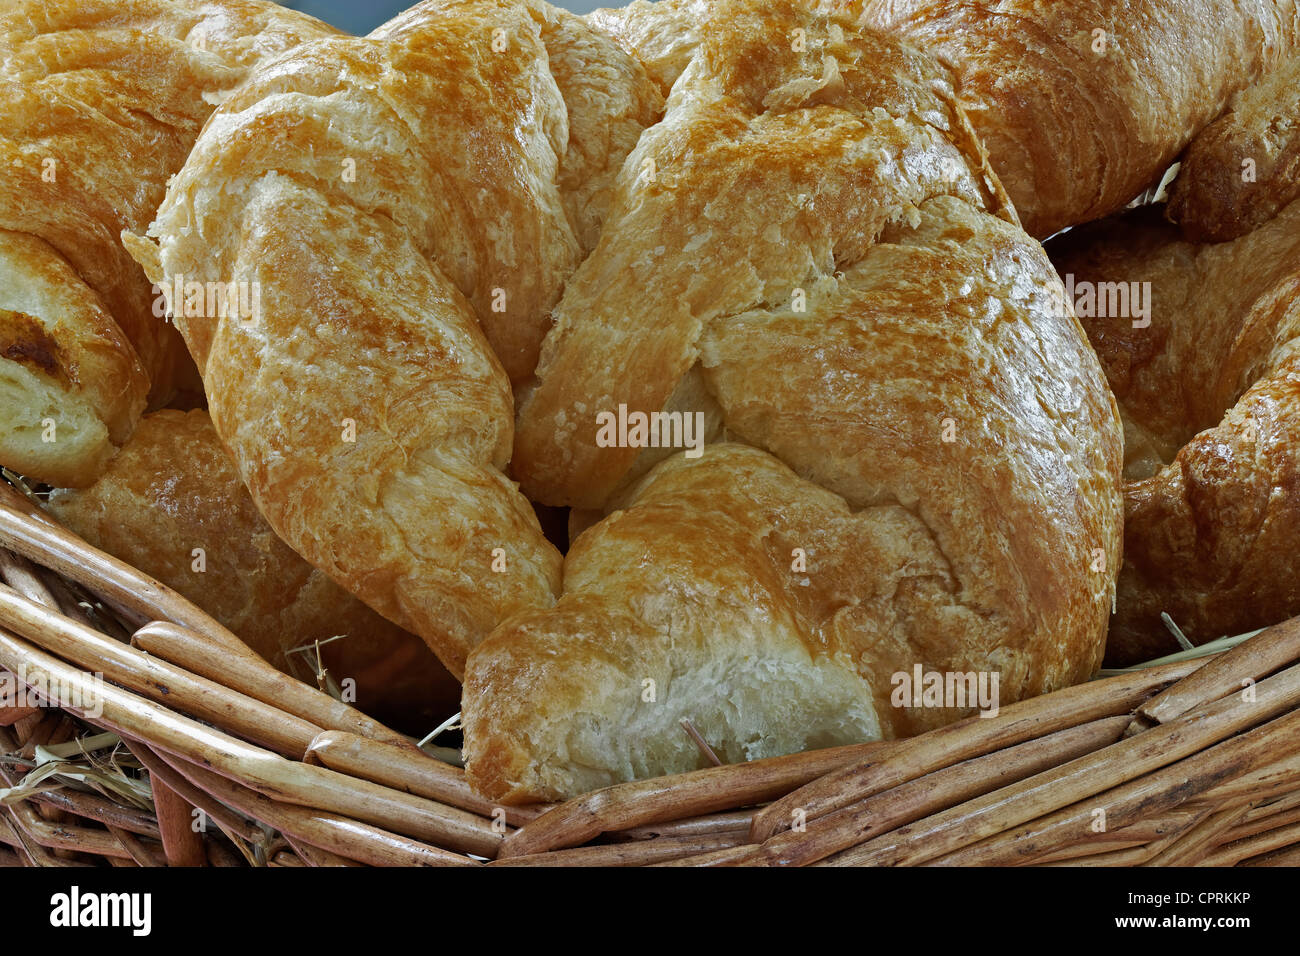 A group of fresh croissants in a hay filled basket Stock Photo